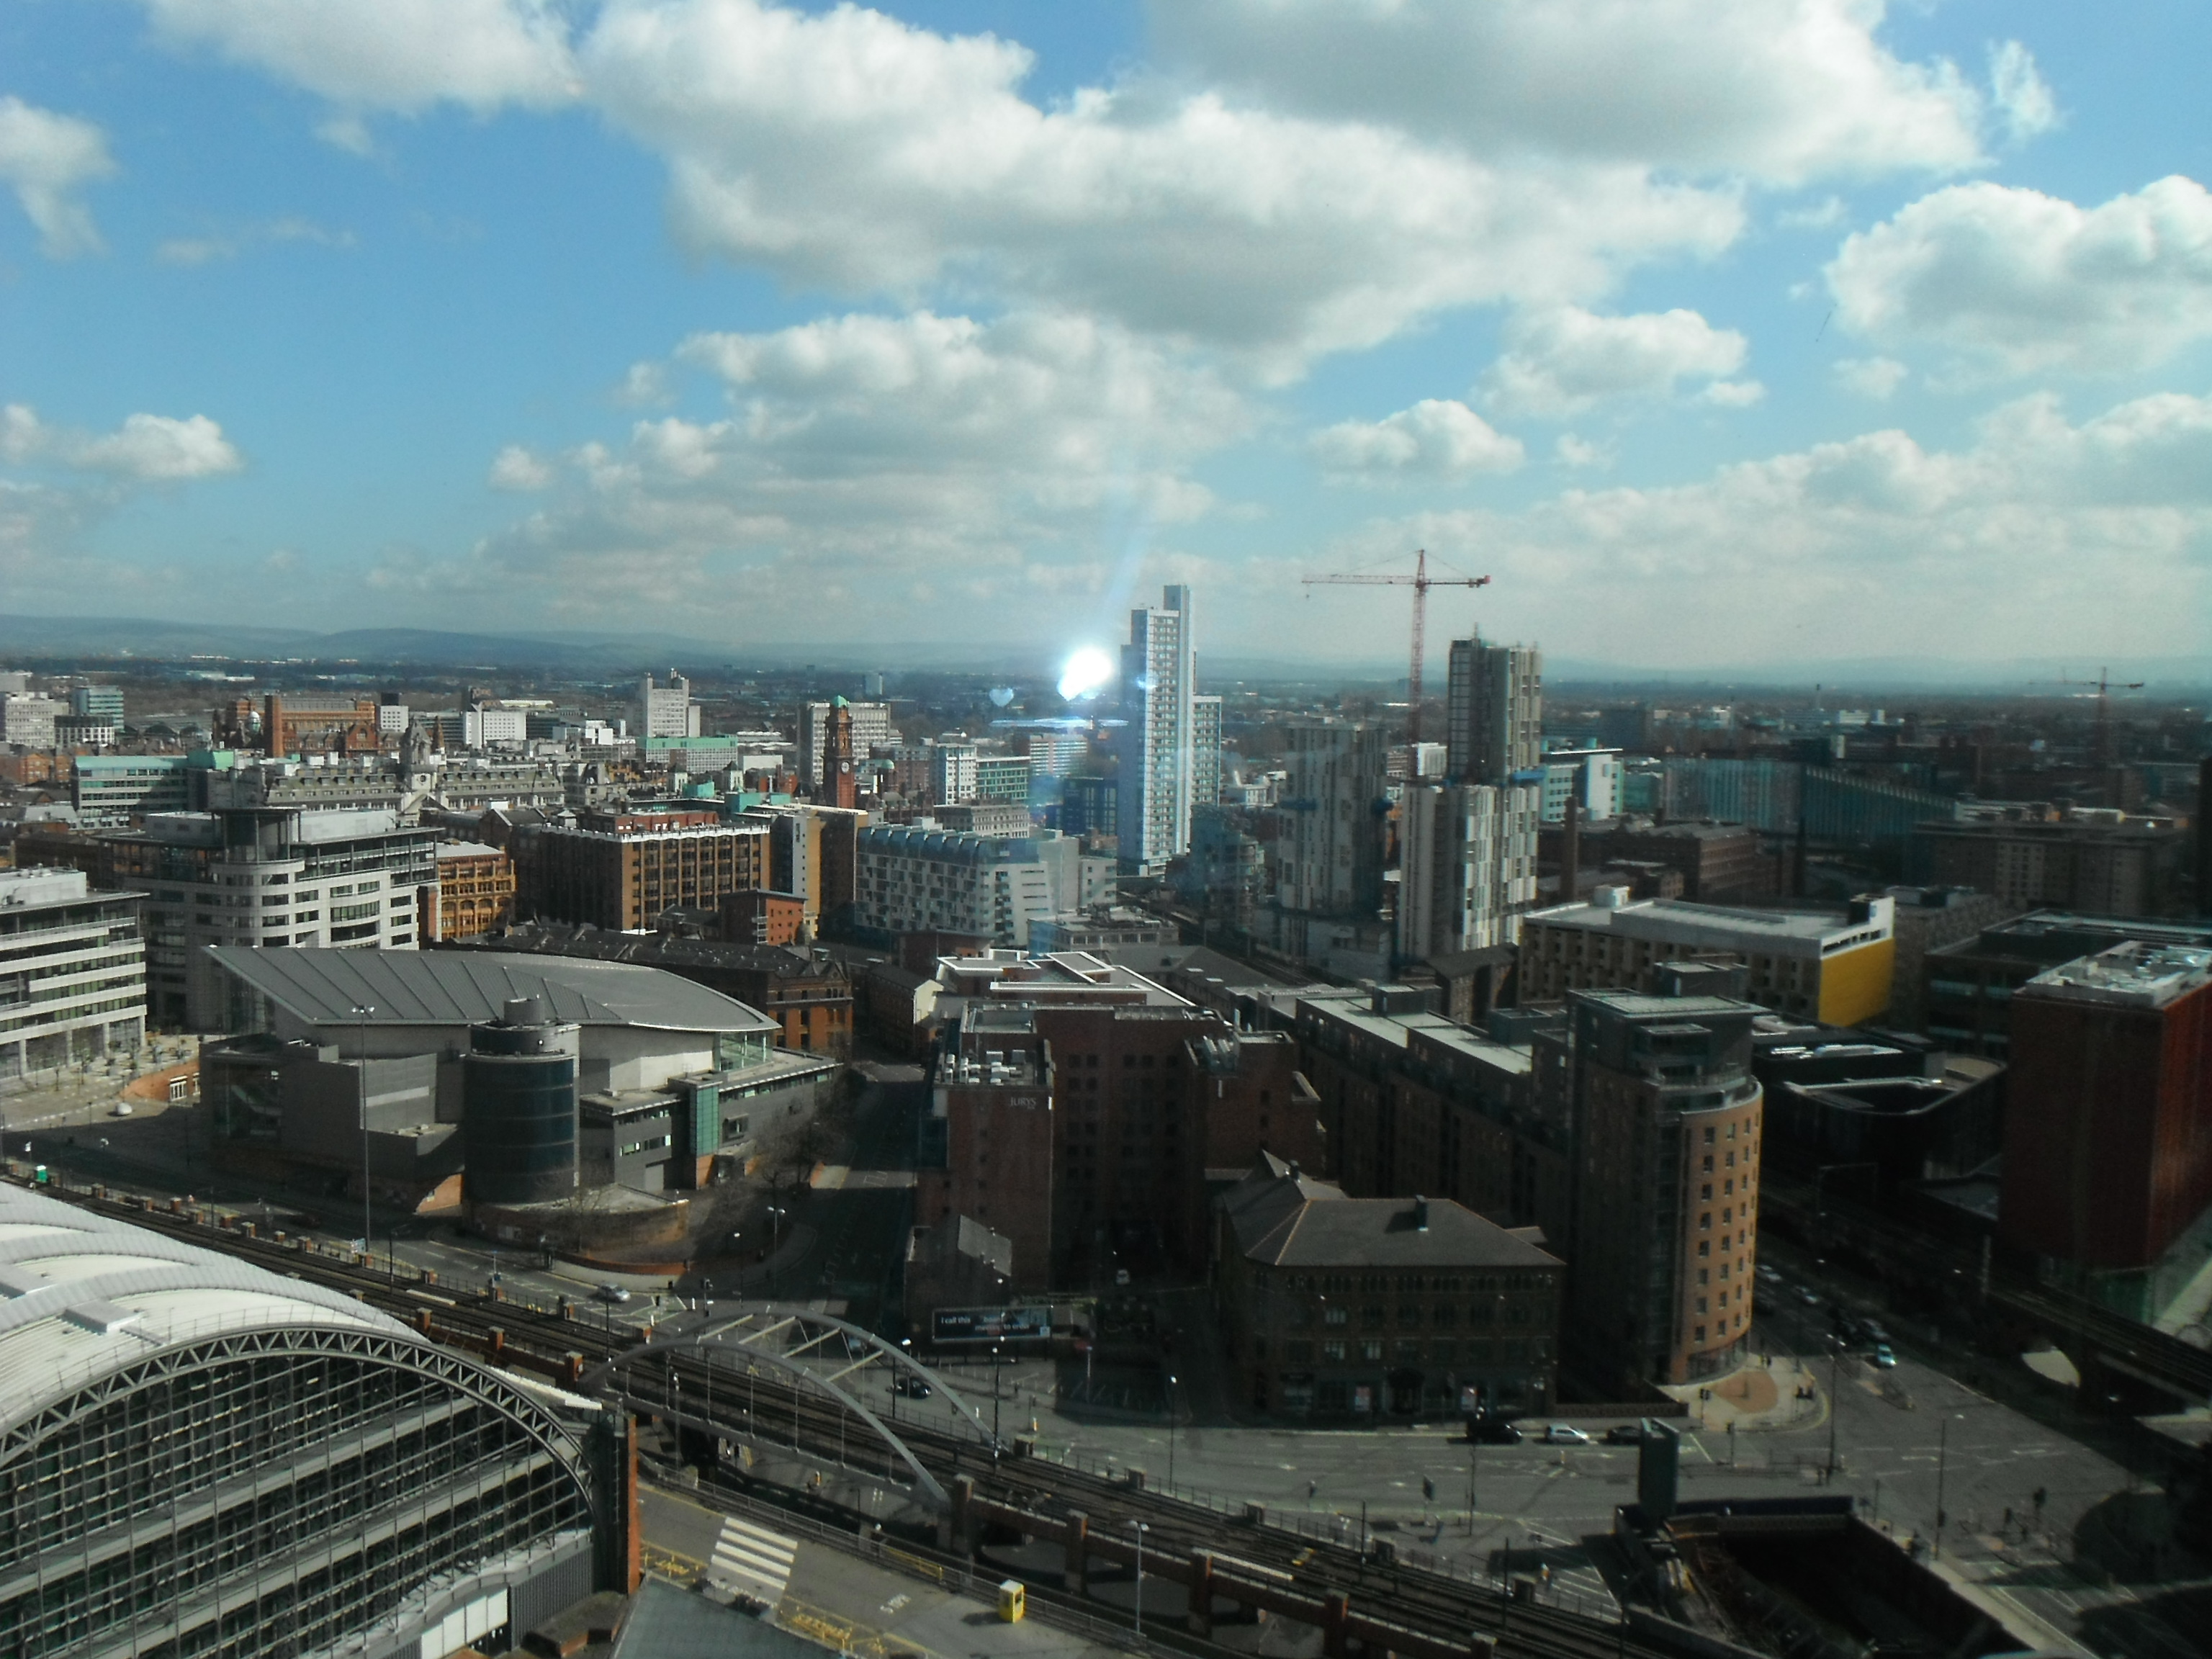 Photo taken by me – The view of Manchester from the Beetham Hotel venue used for the convention.